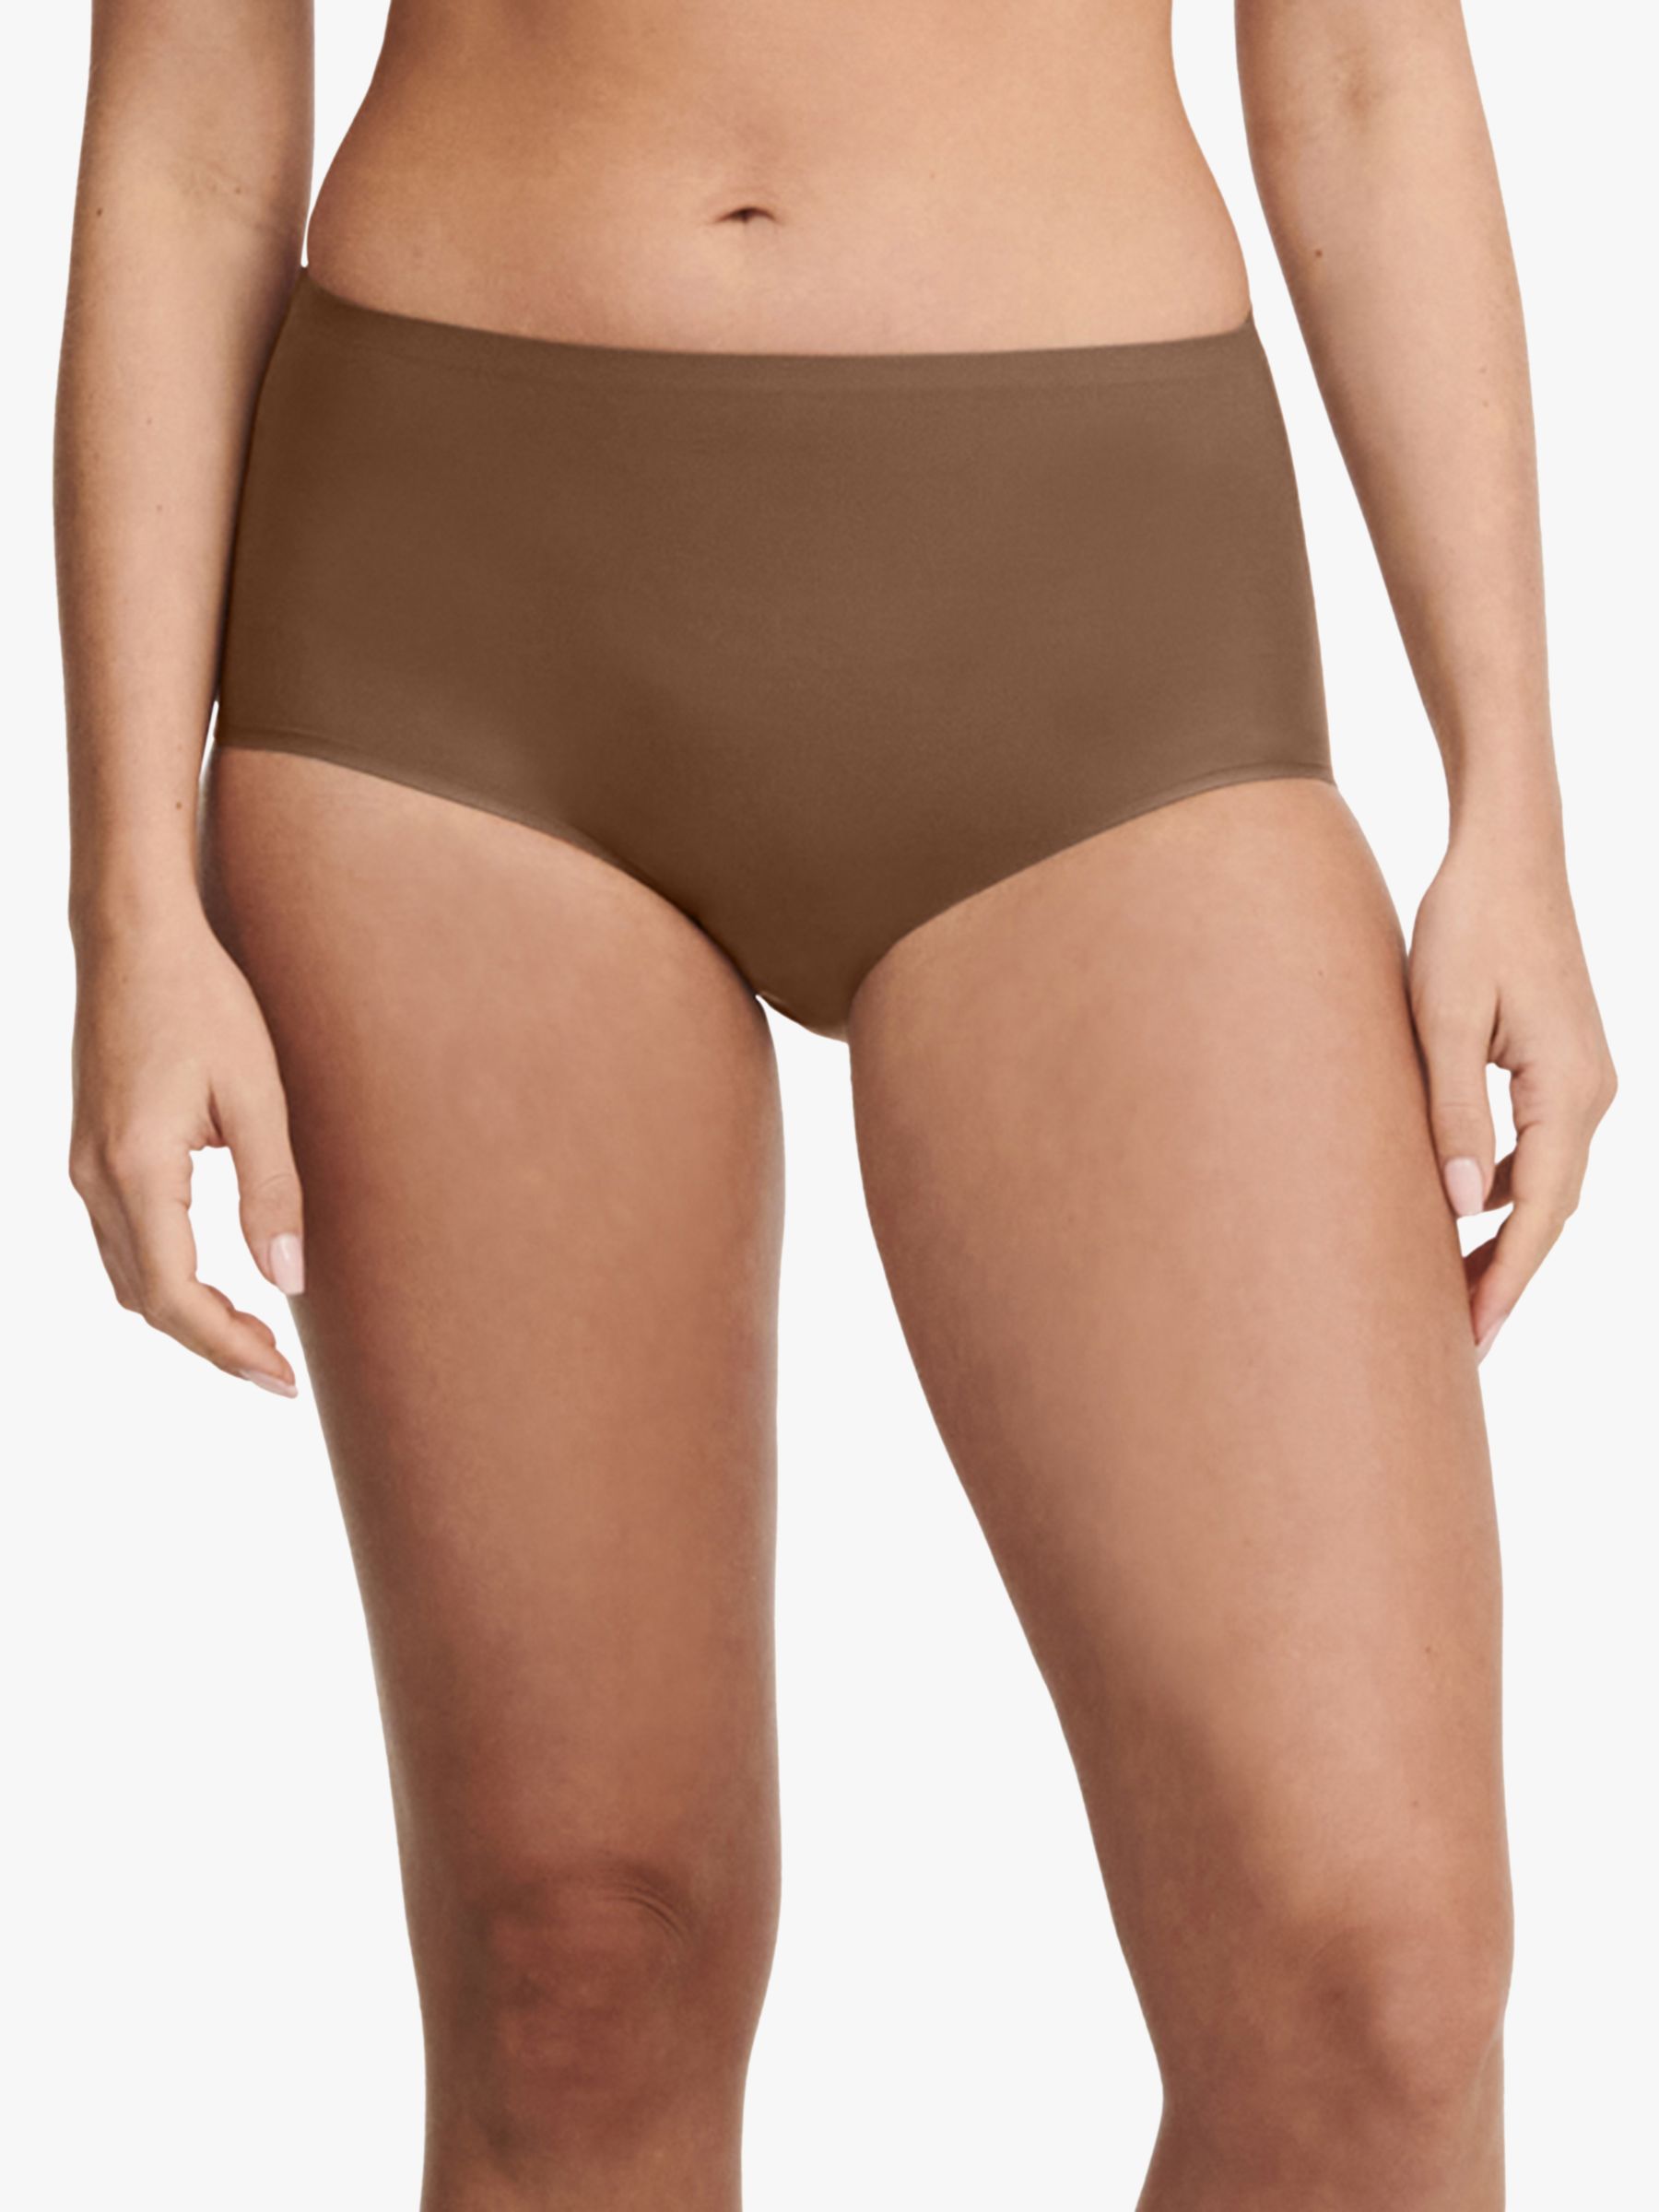 Chantelle Soft Stretch High Waisted Knickers, Cocoa, One Size